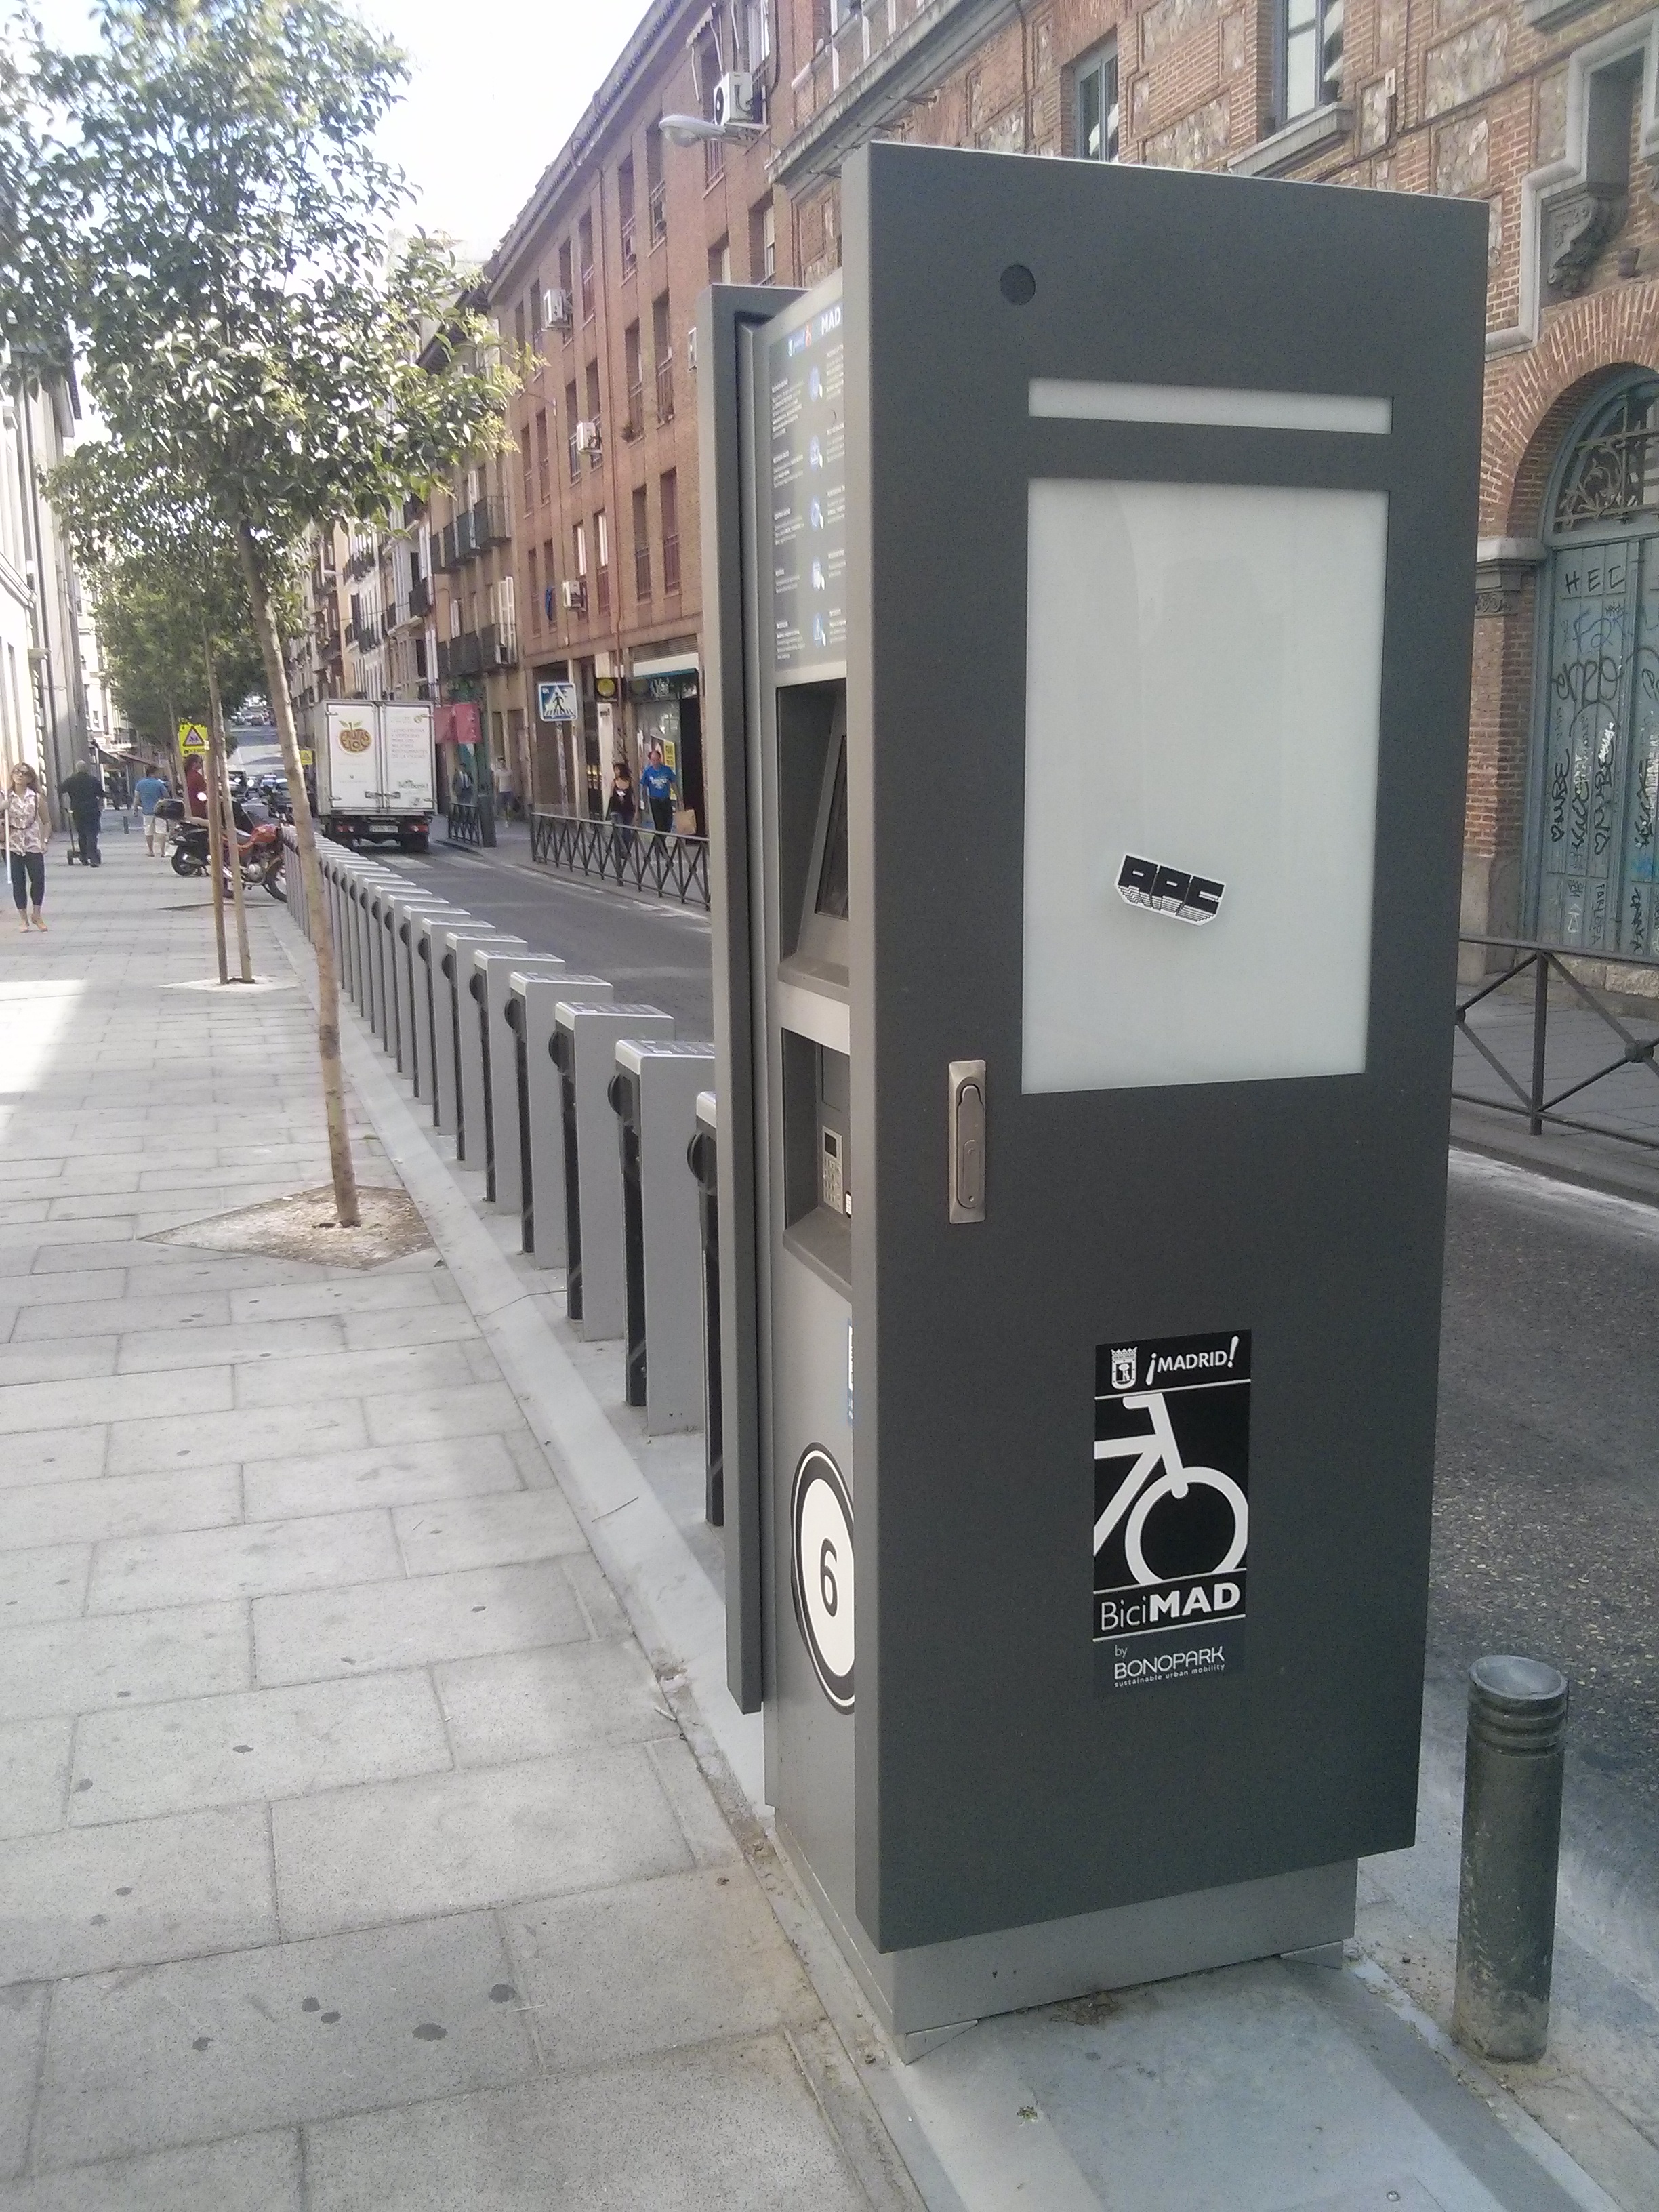 One of the Many Bici Mad- Bike Rental Stations (Picture by Author)